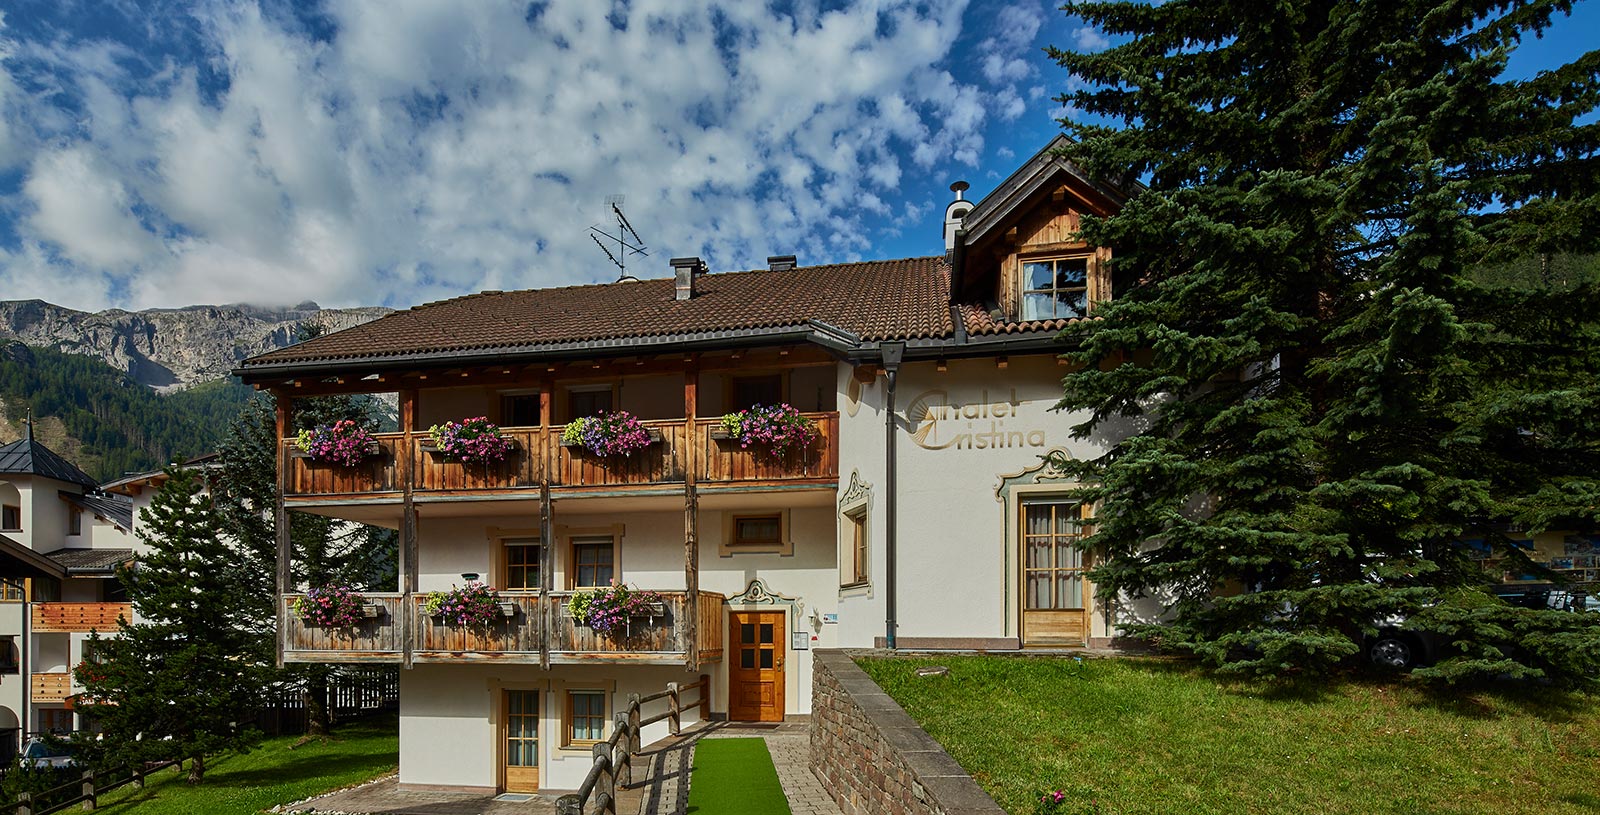 The building of the Chalet Cristina in Corvara in classic South Tyrolean style